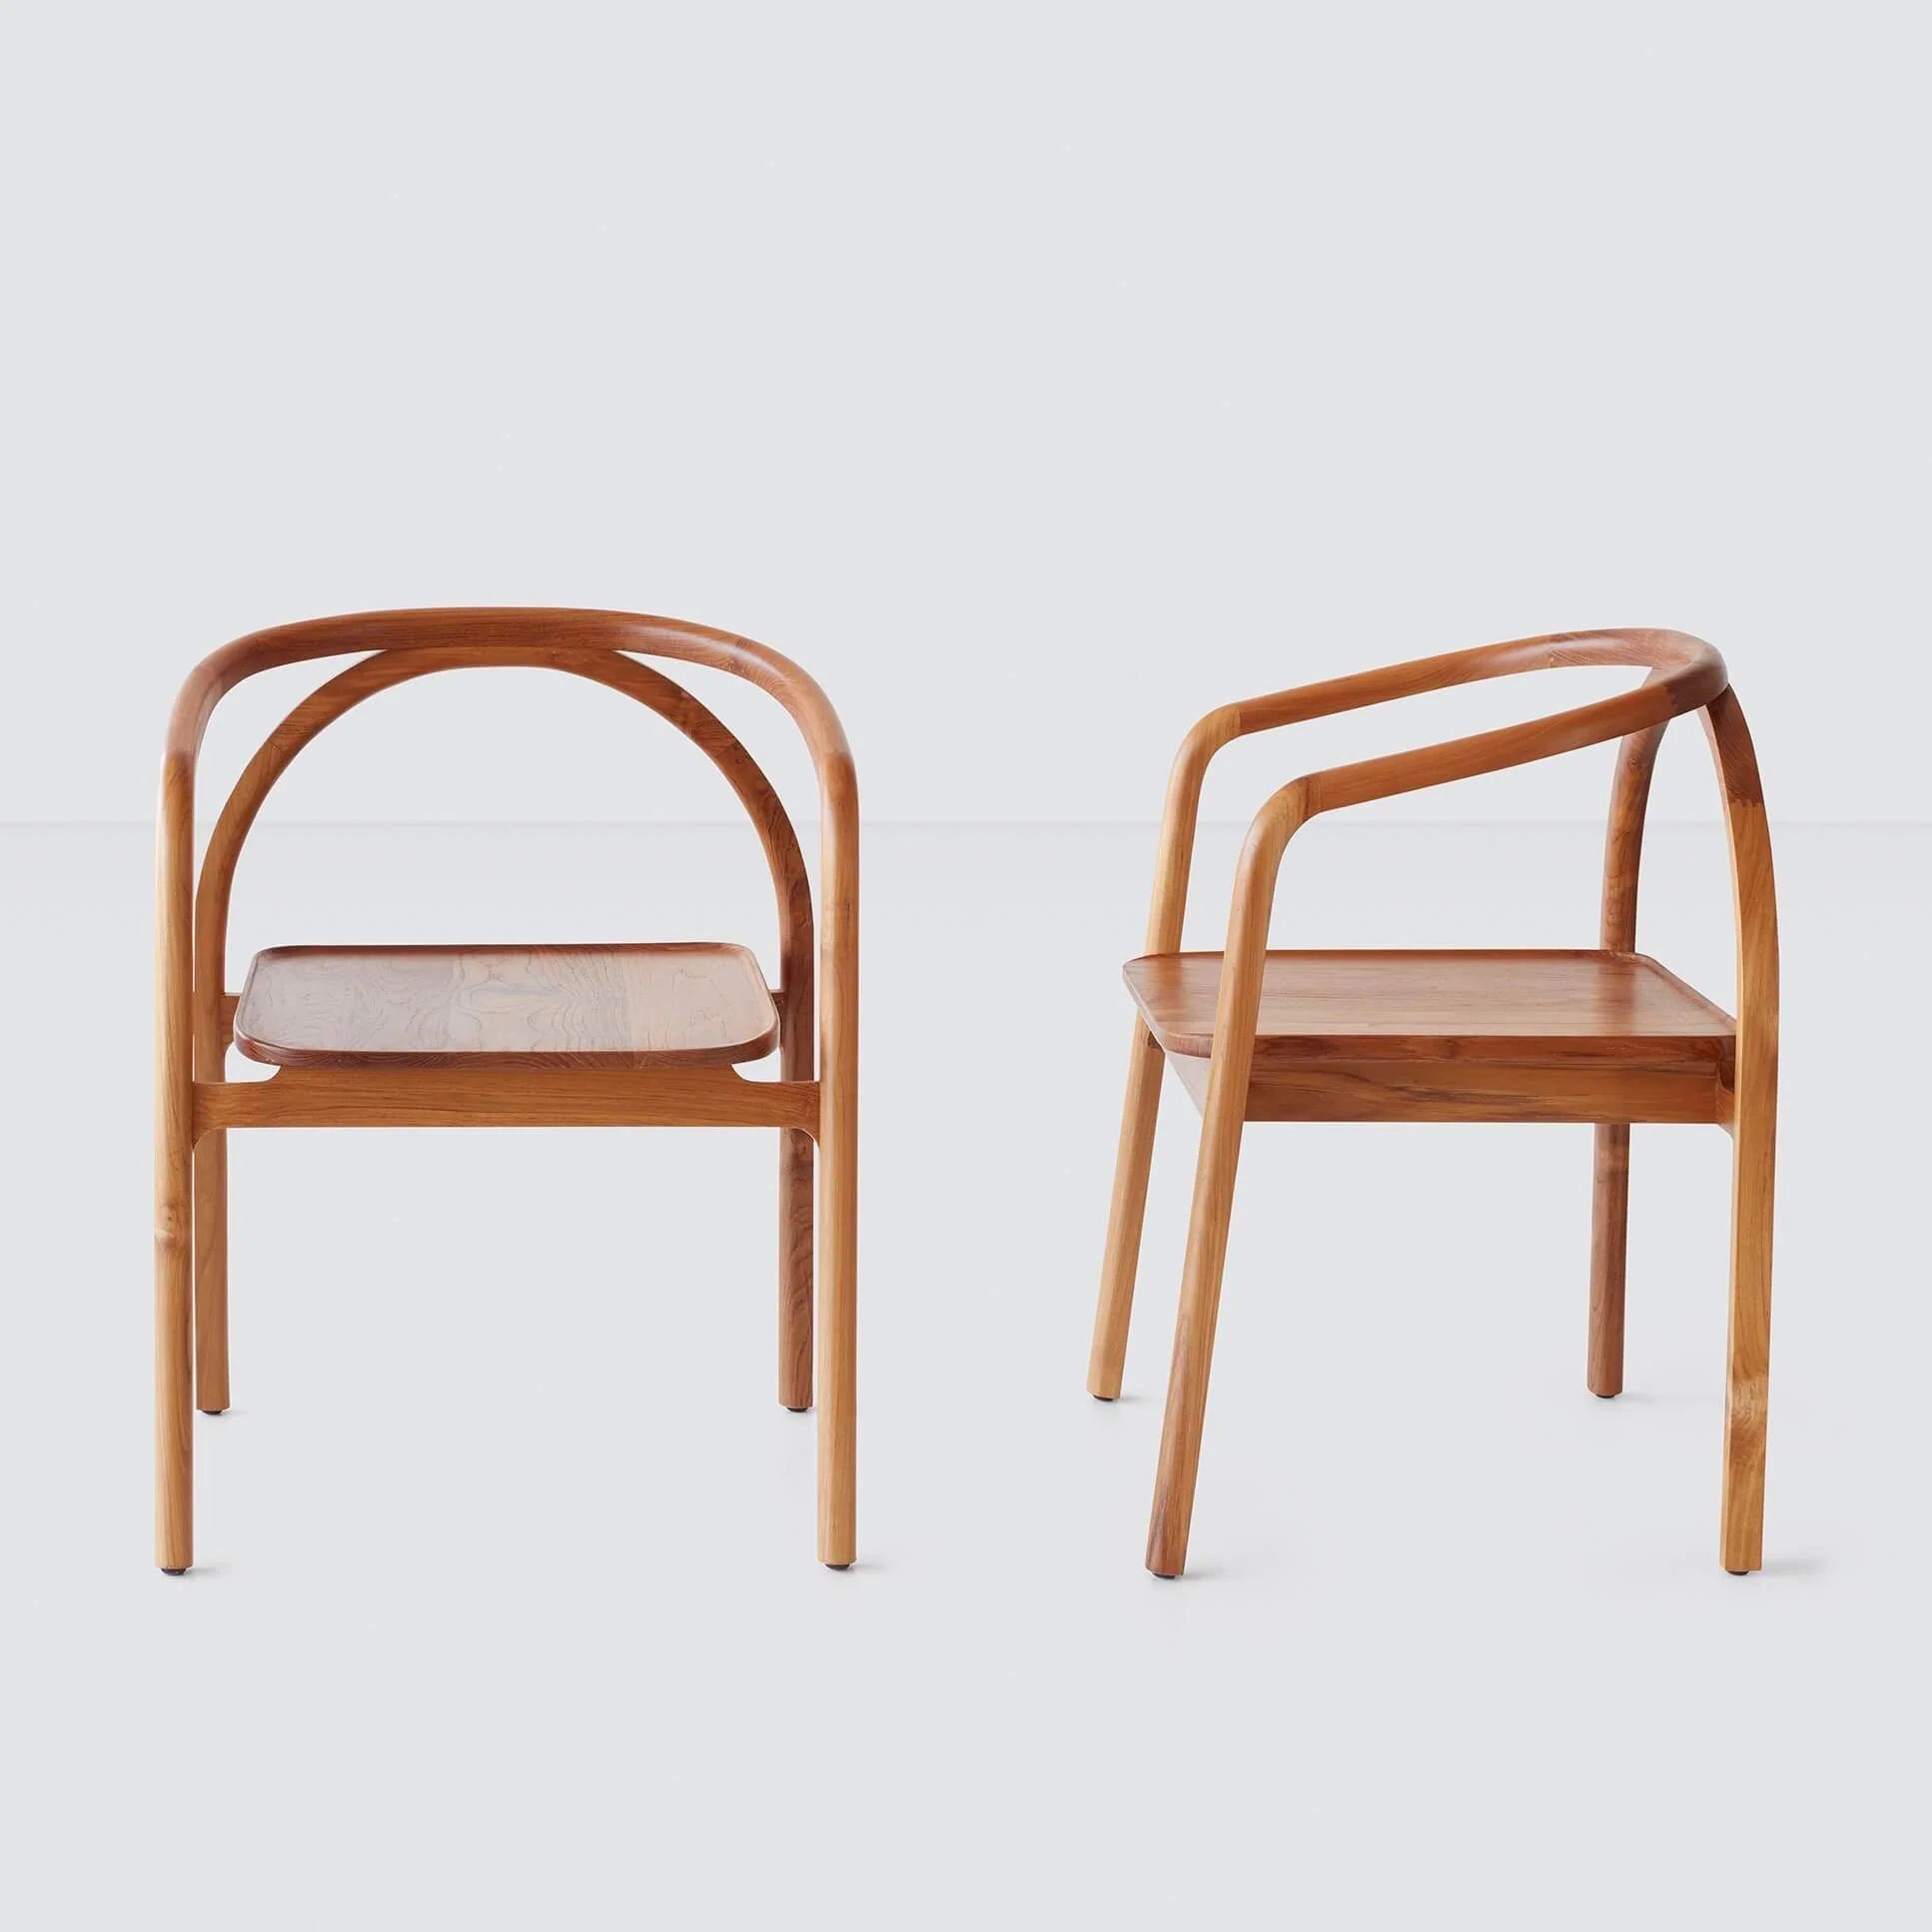 Teak Wishbone Chair | Sustainably Crafted in Indonesia   – The Citizenry | The Citizenry